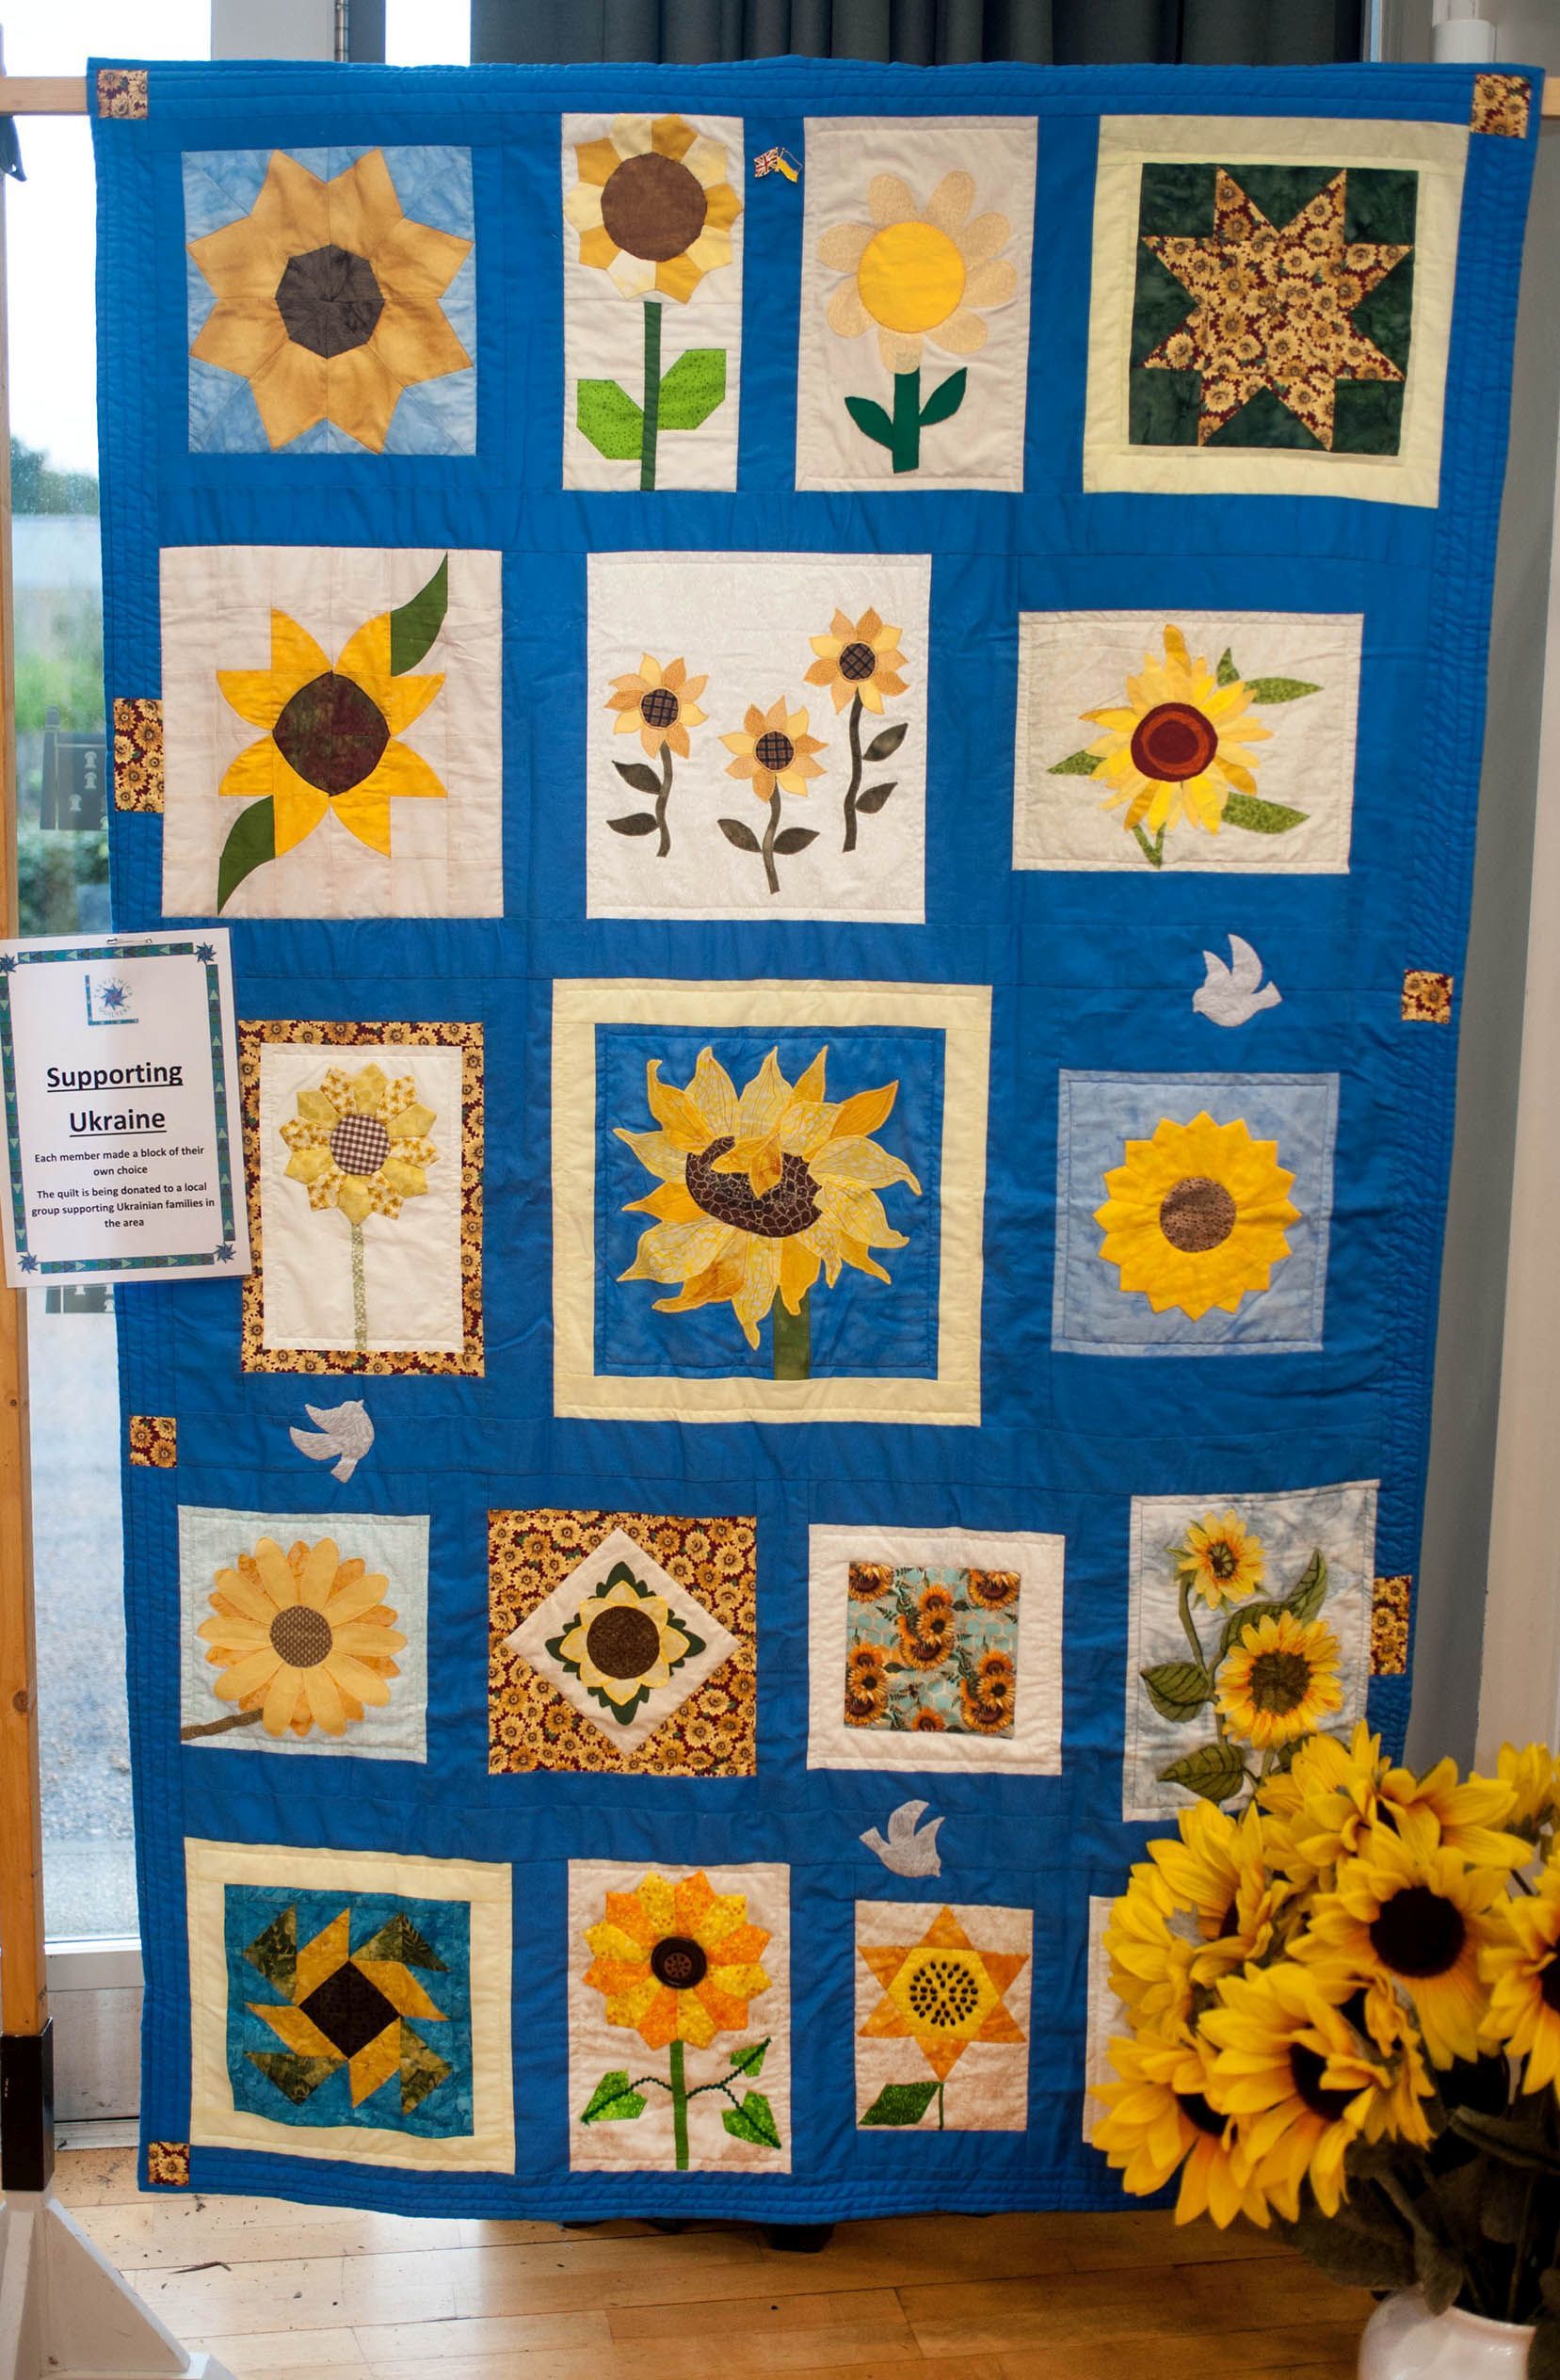 The quilt made by the group in support of the Ukraine